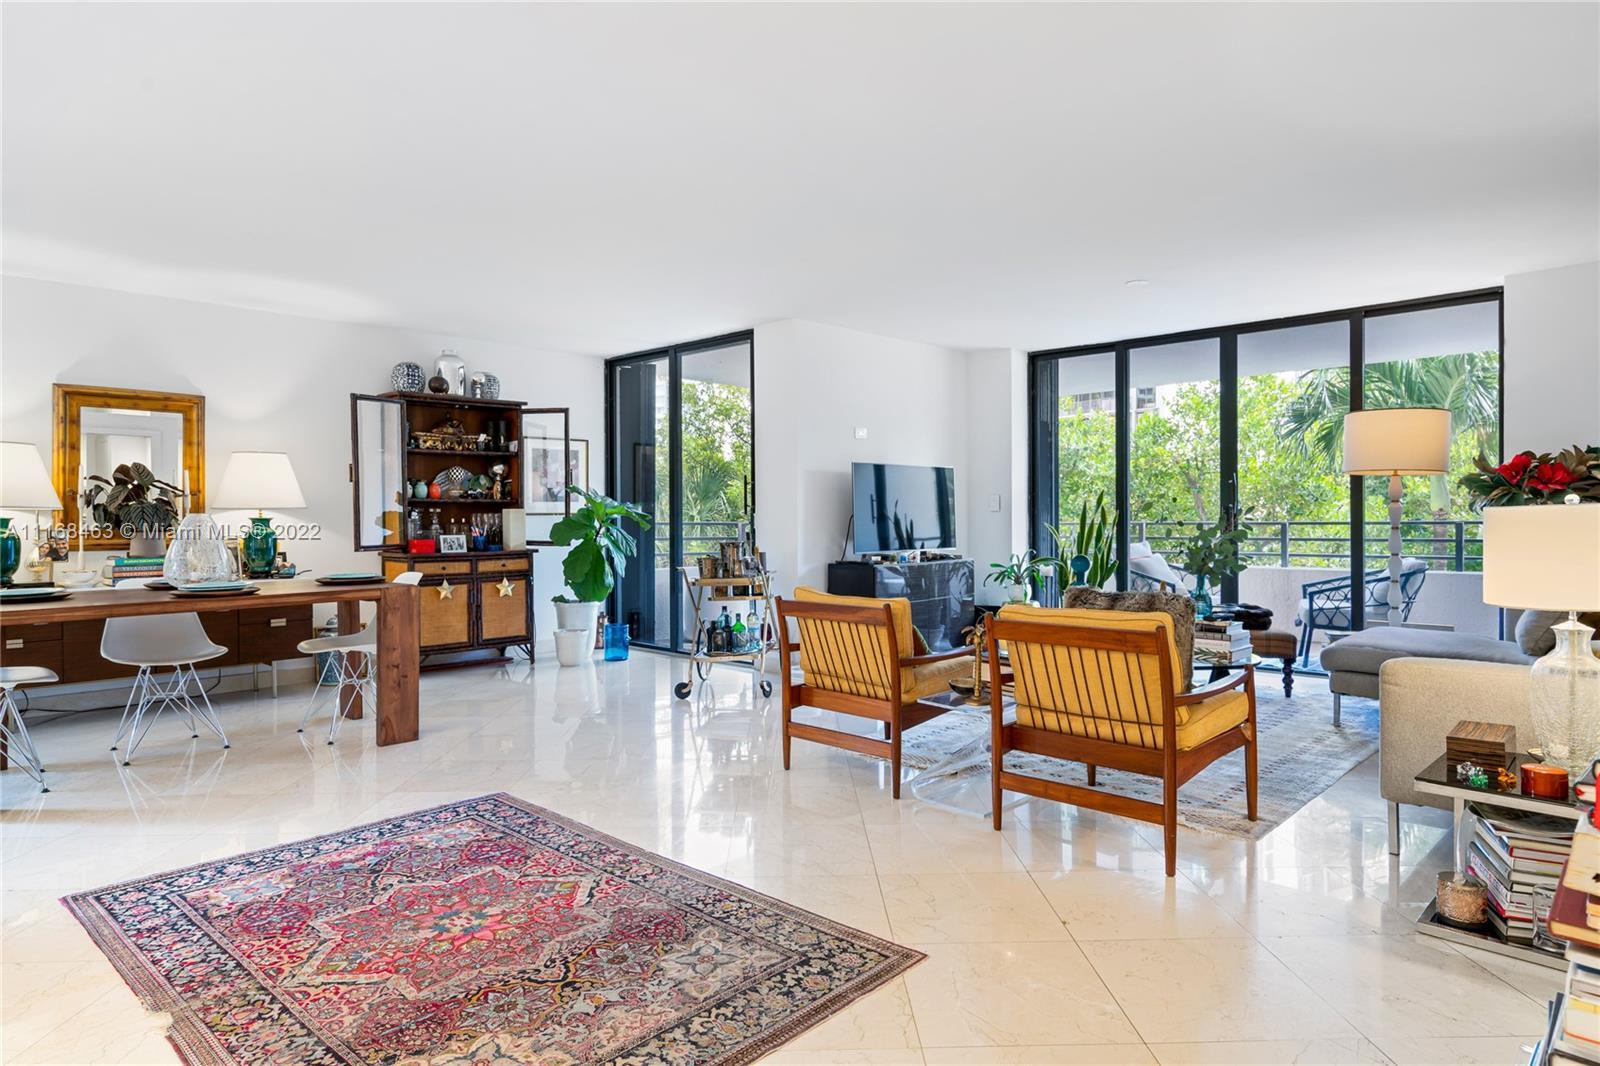 Rare opportunity to own in the beautiful boutique Brickell East Condo with only 64 units, this turn-